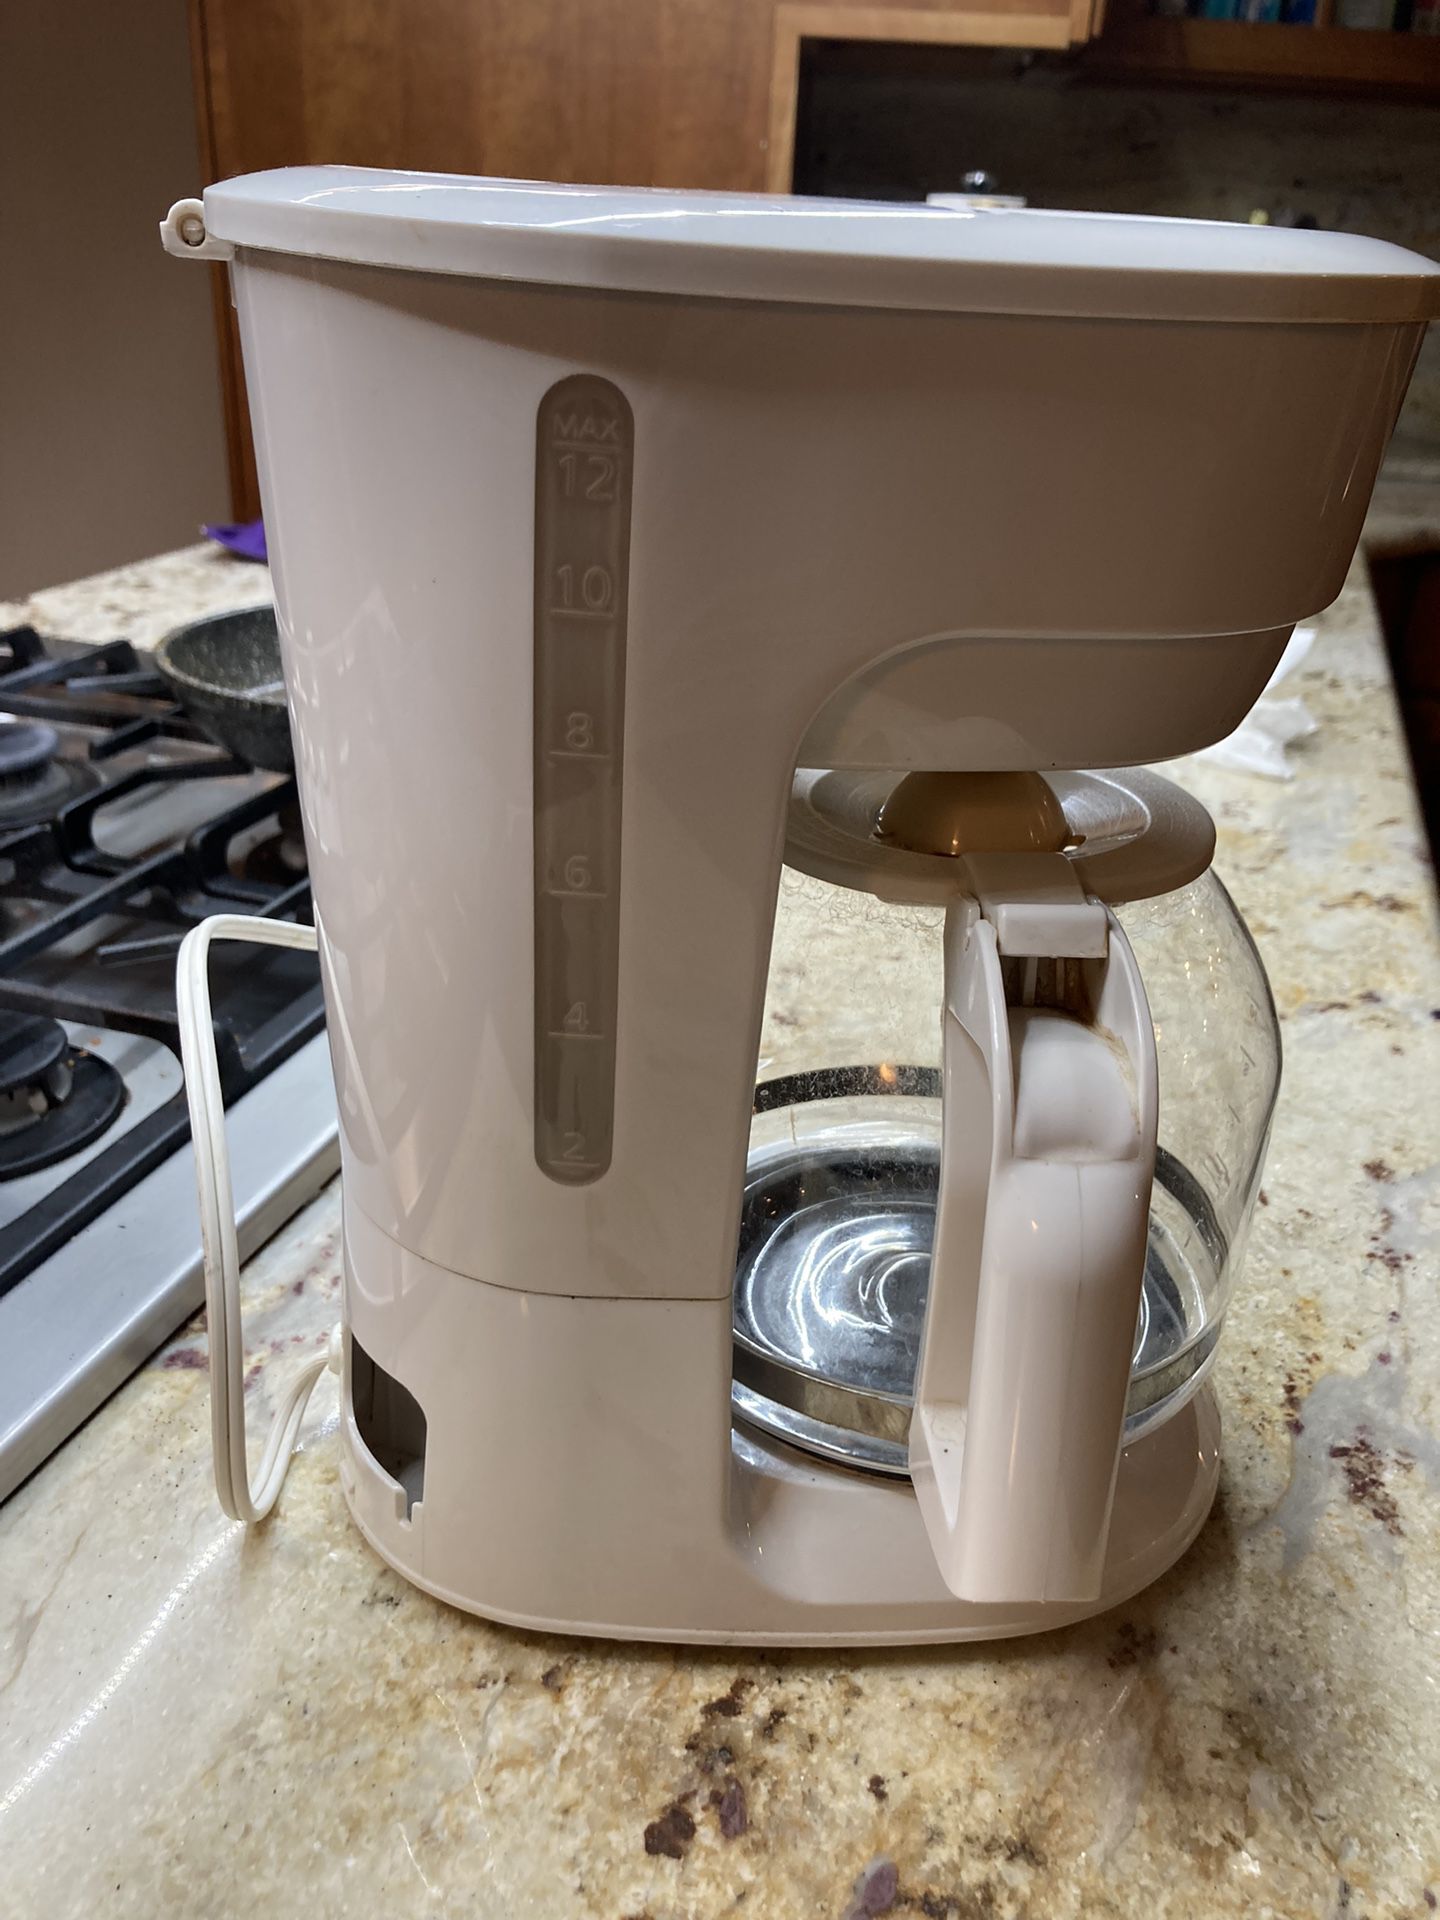 Mainstays 12 cup Coffee Maker for Sale in Saint Albans, WV - OfferUp